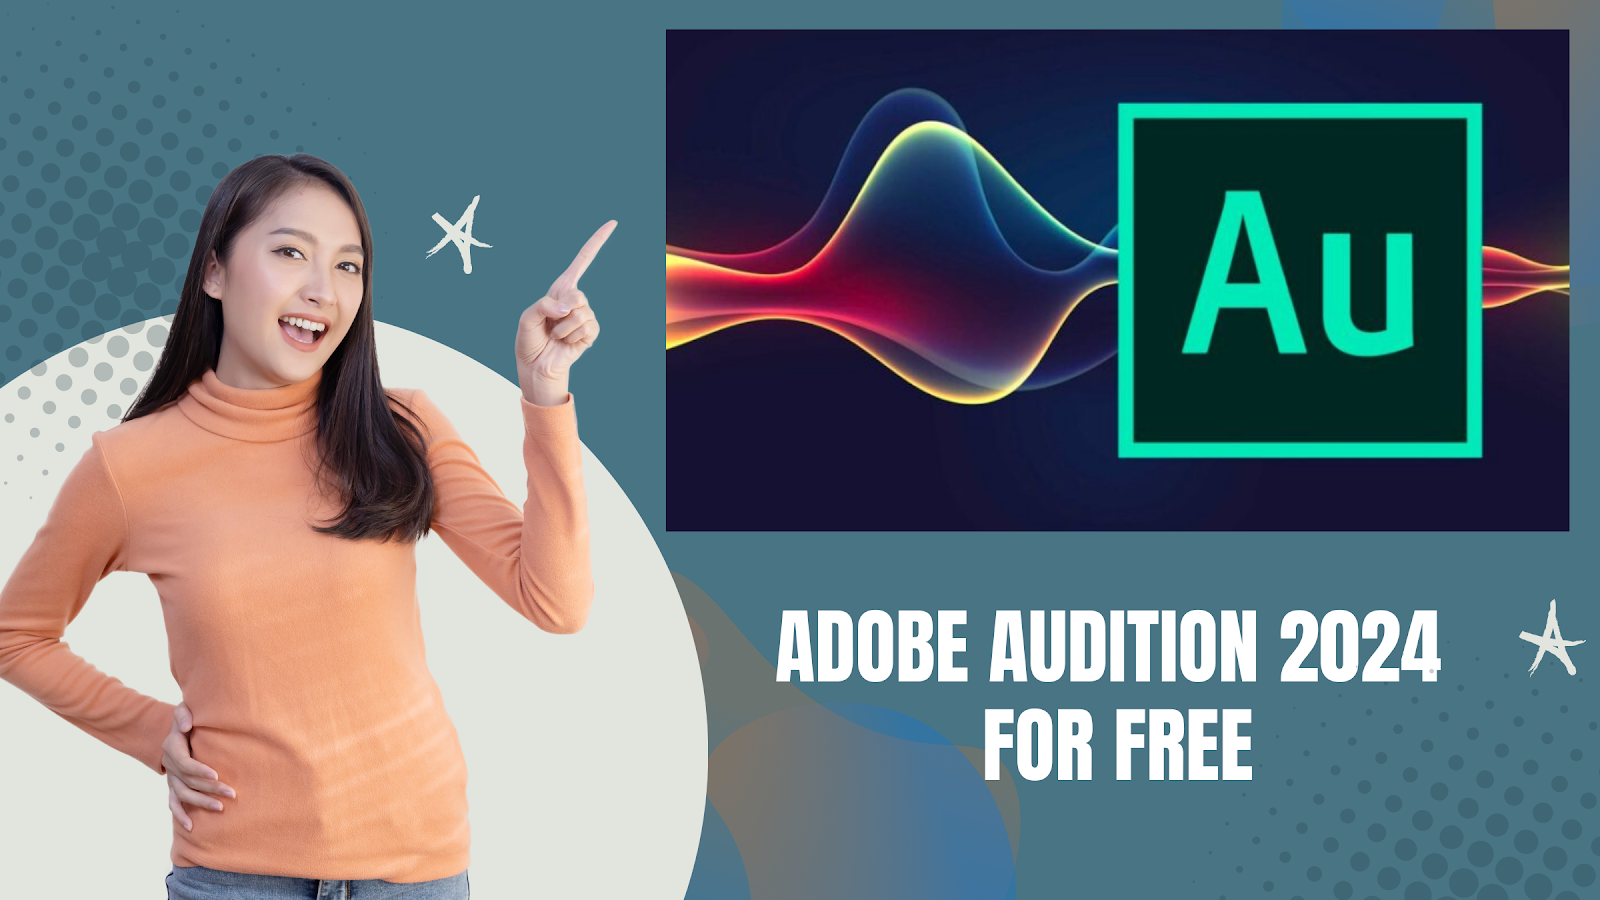 Install Adobe Audition 2024 for Free